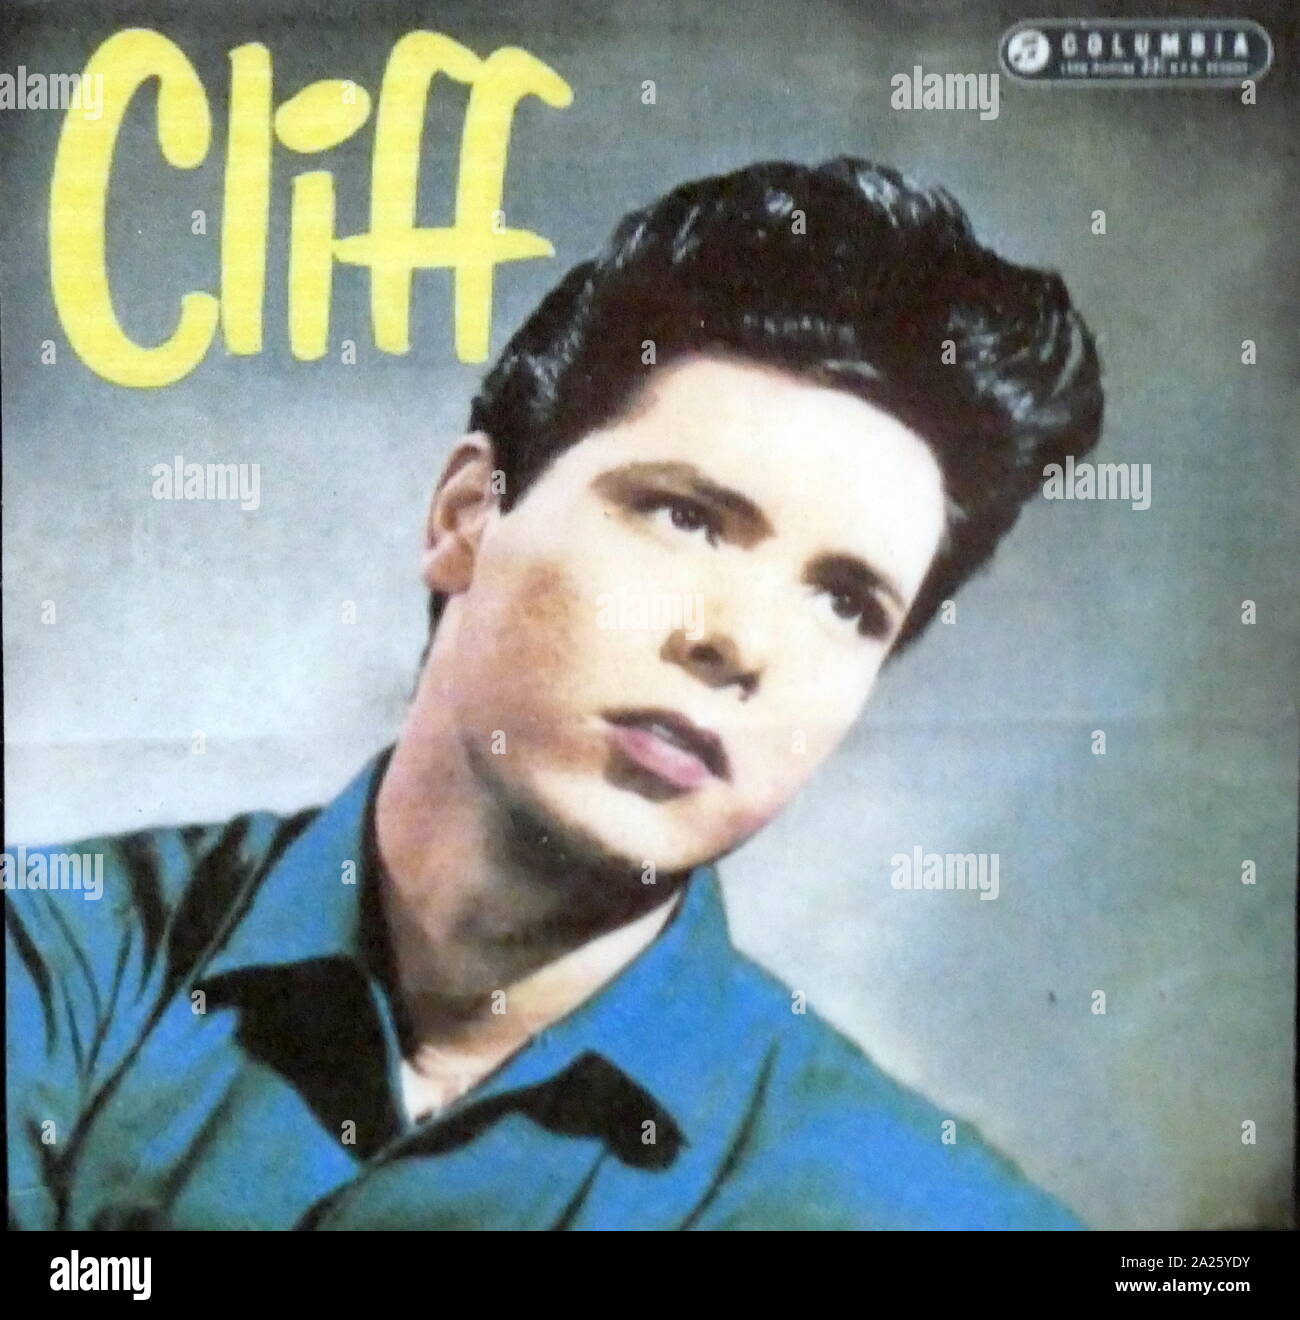 Photograph of a younger Cliff Richard under Columbia Records. Cliff Richard (1940-) a British pop singer, musician, performer, actor and philanthropist. Stock Photo